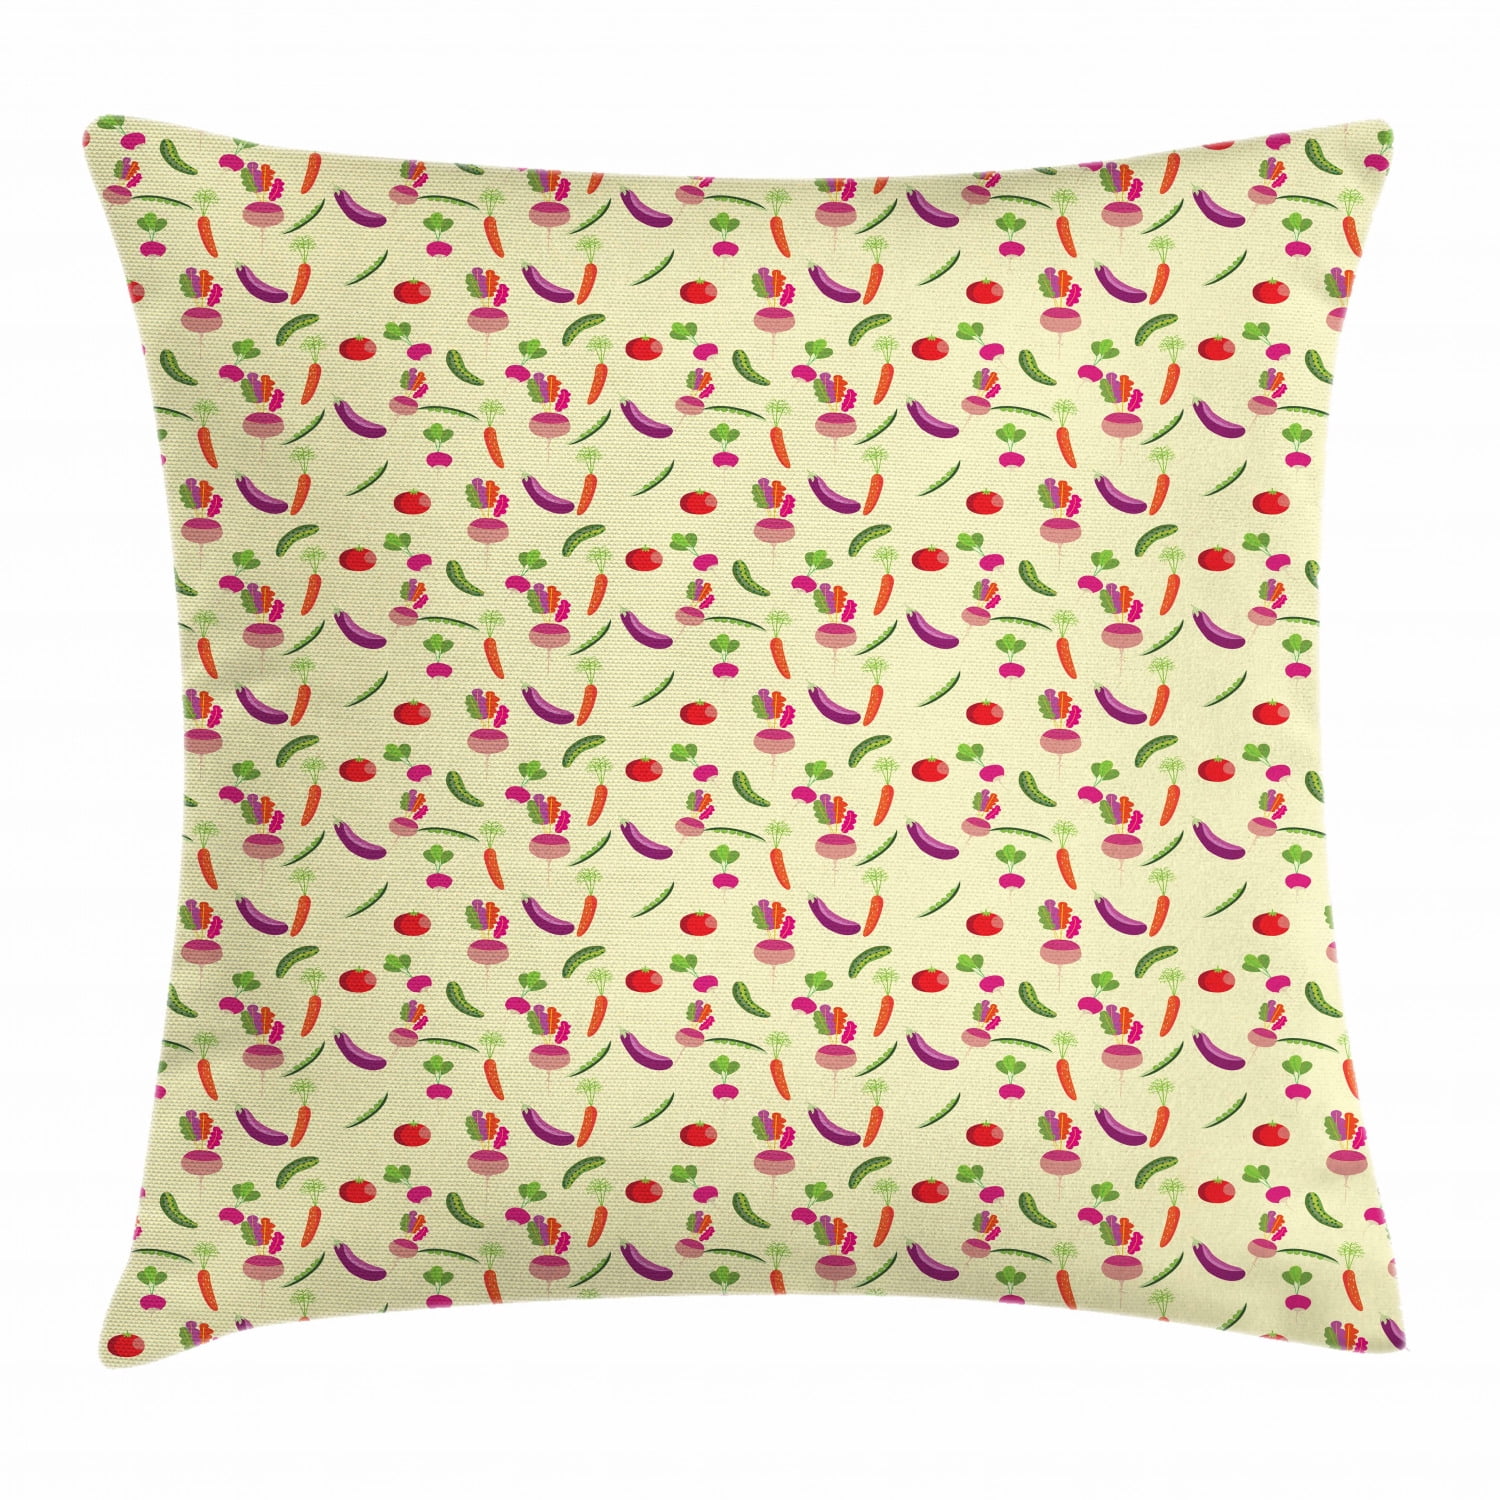 Vegetable Throw Pillow Cushion Cover, Tomatoes and Carrots on Cream ...